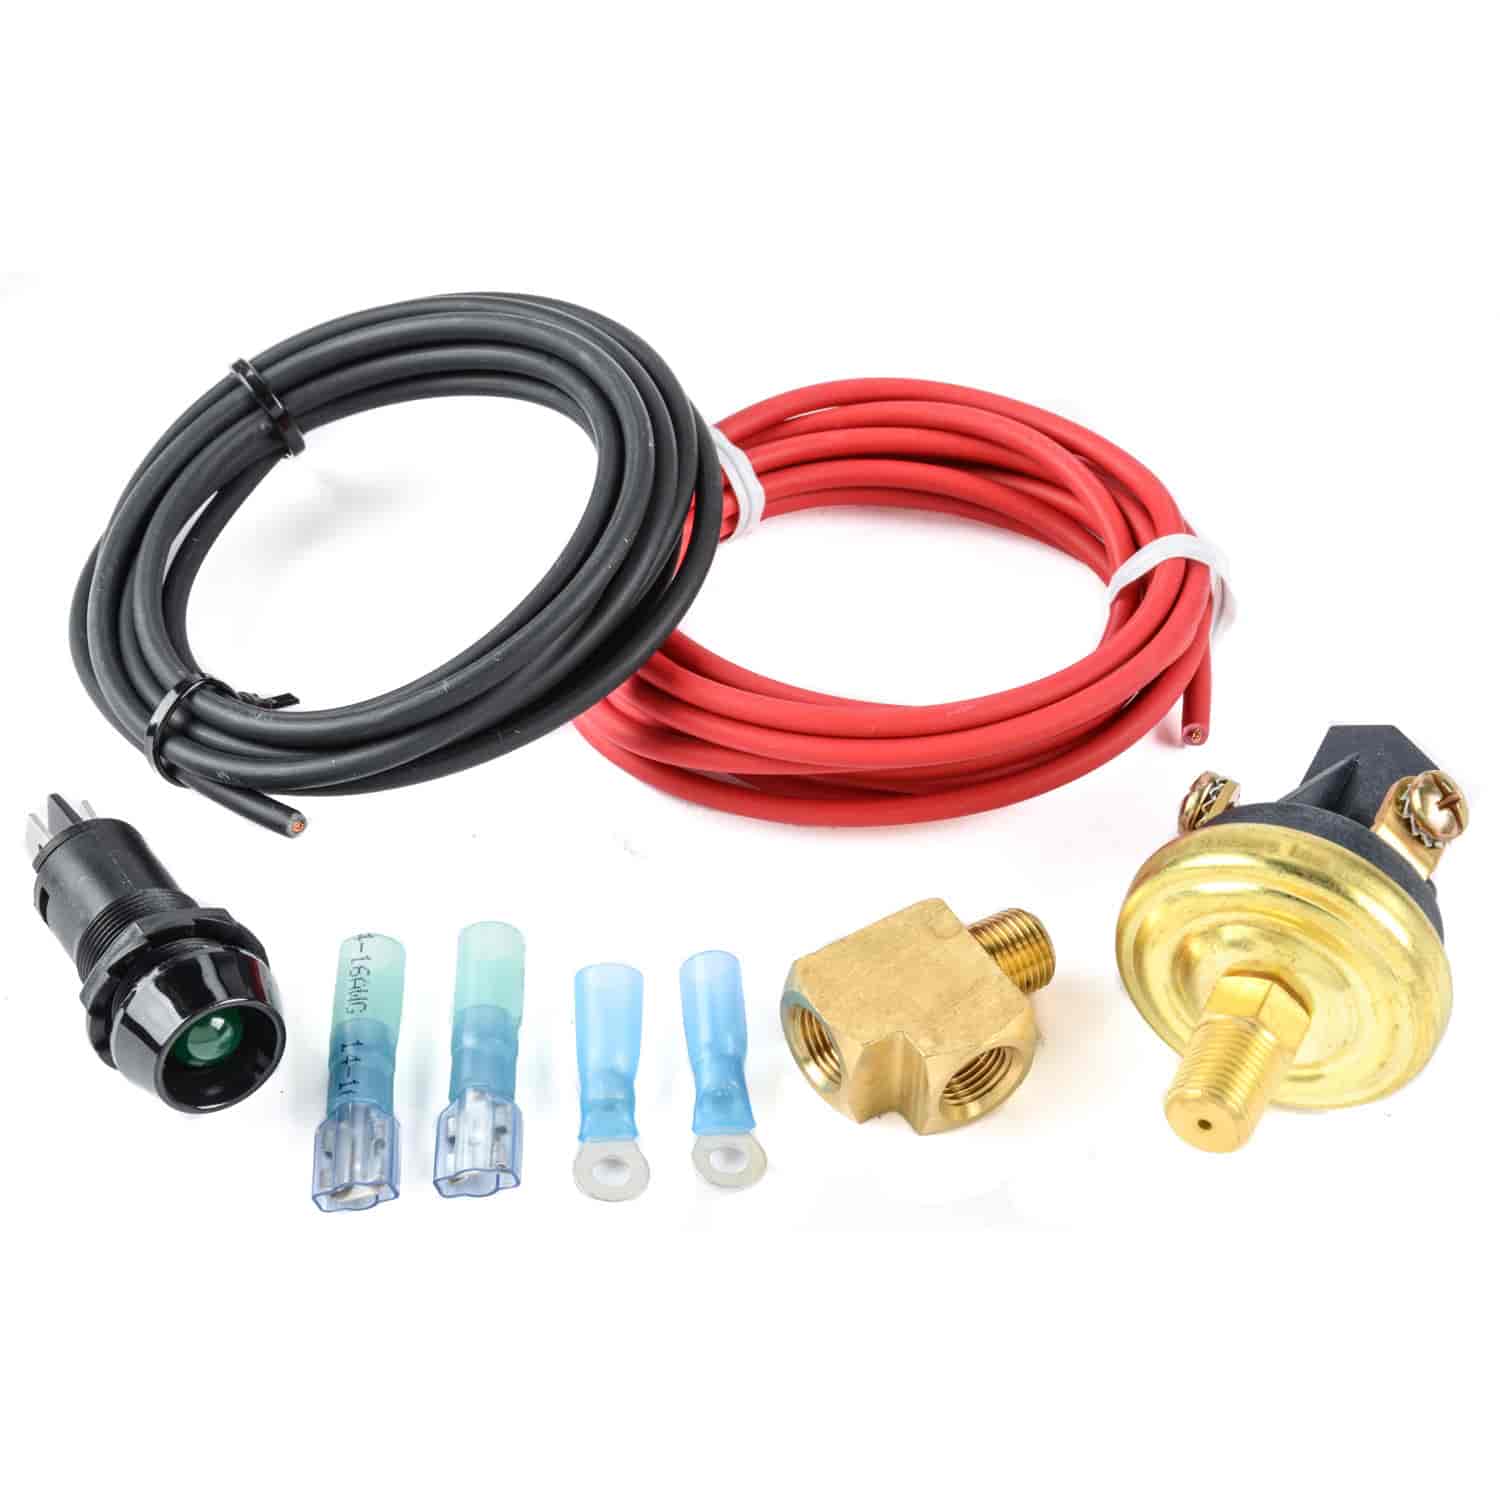 Adjustable Fuel Pressure Light Kit Preset to 3 PSI (adjustable from 0.5 to 24 PSI)